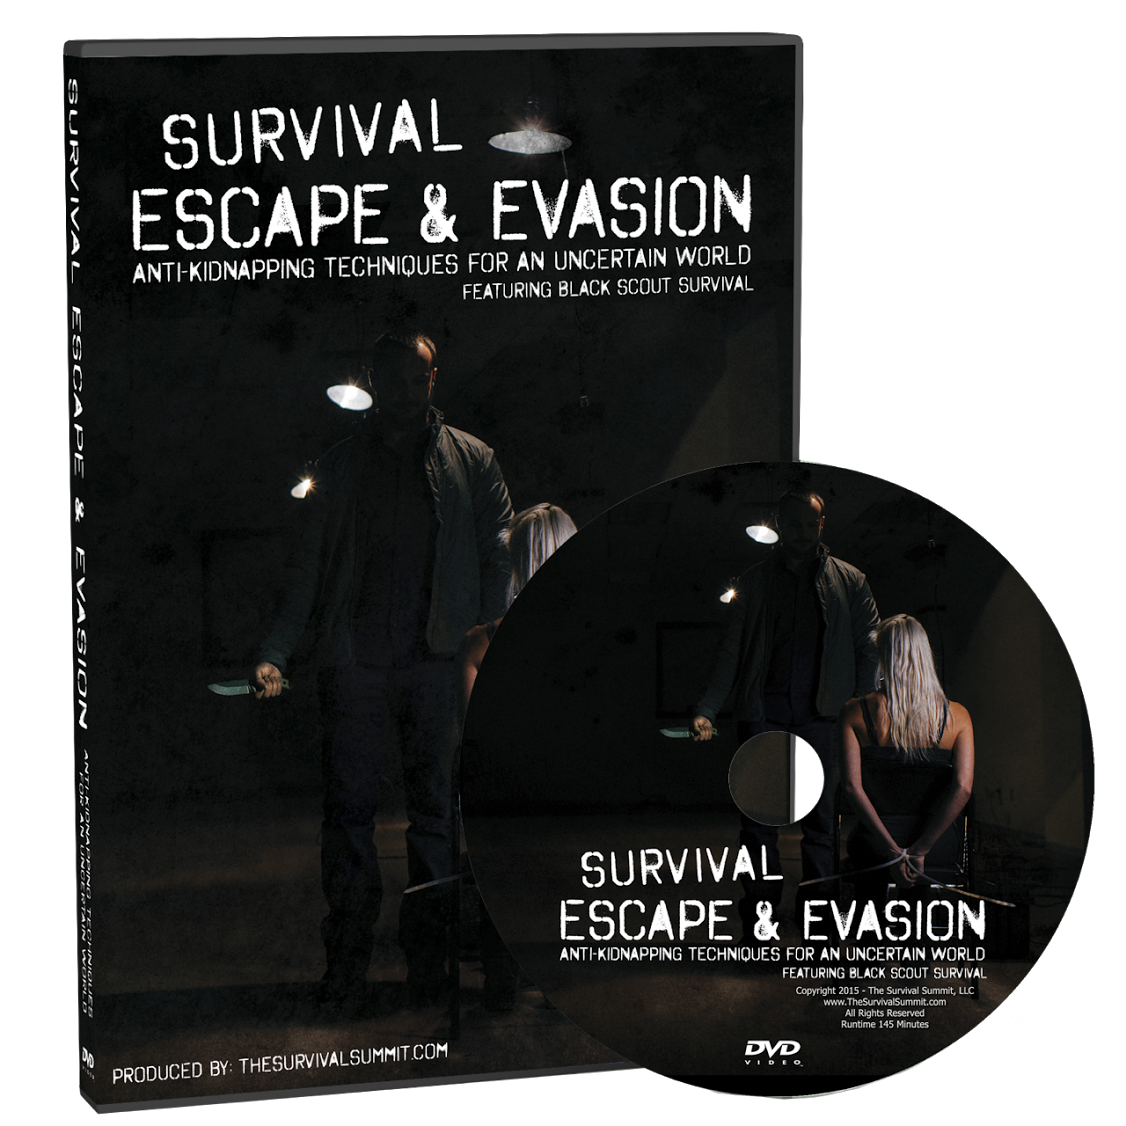 BUY MY ESCAPE AND EVASION DVD HERE